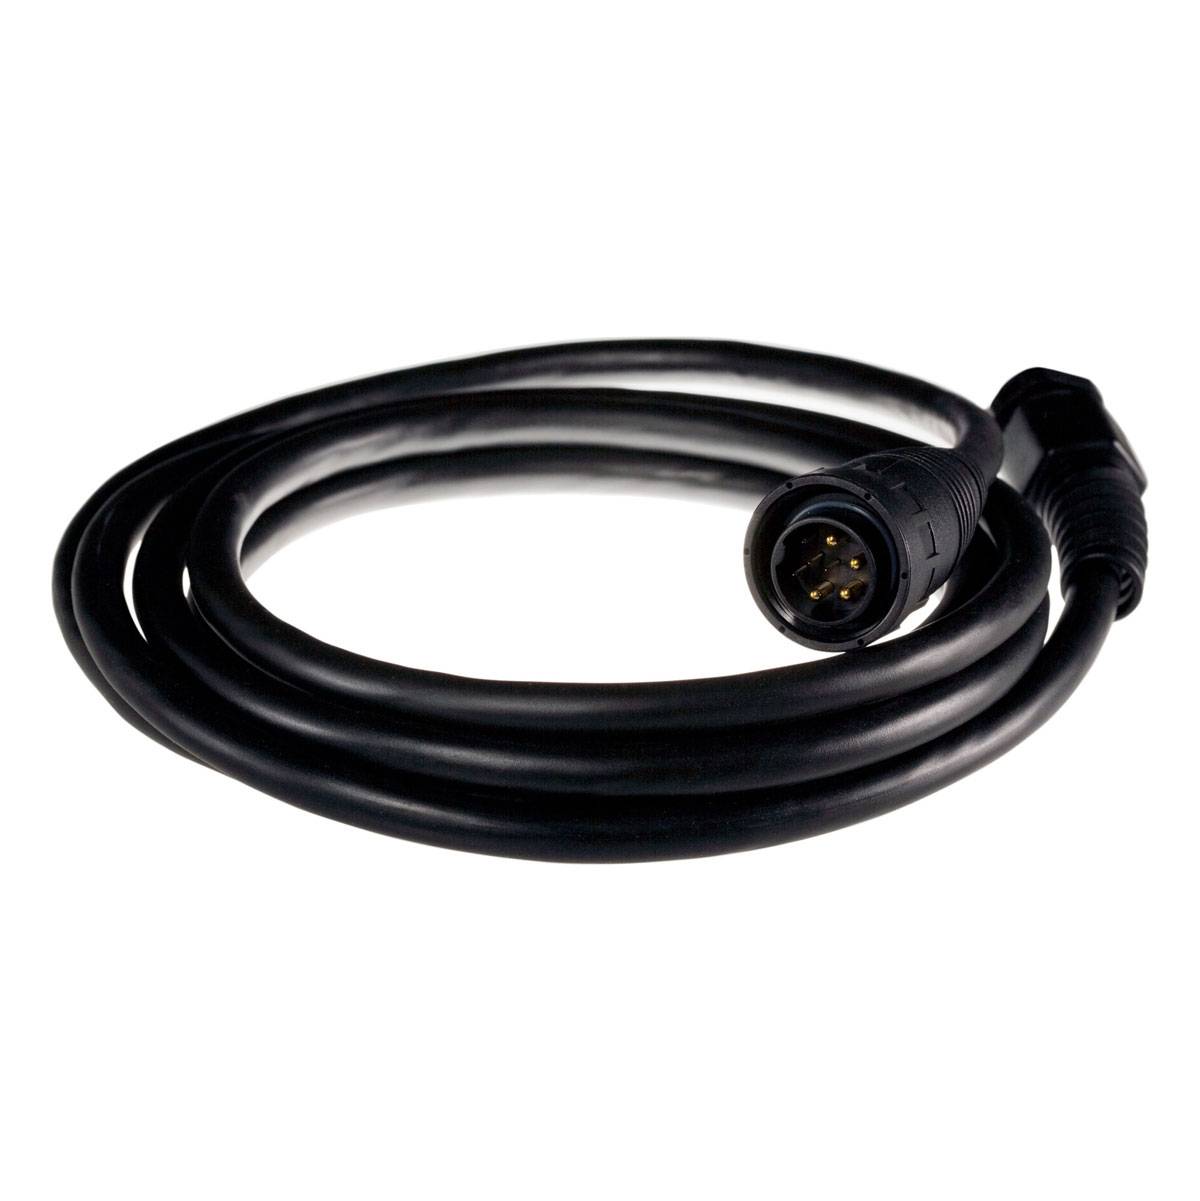 Torqeedo Motor Cable Extension for Travel and UL